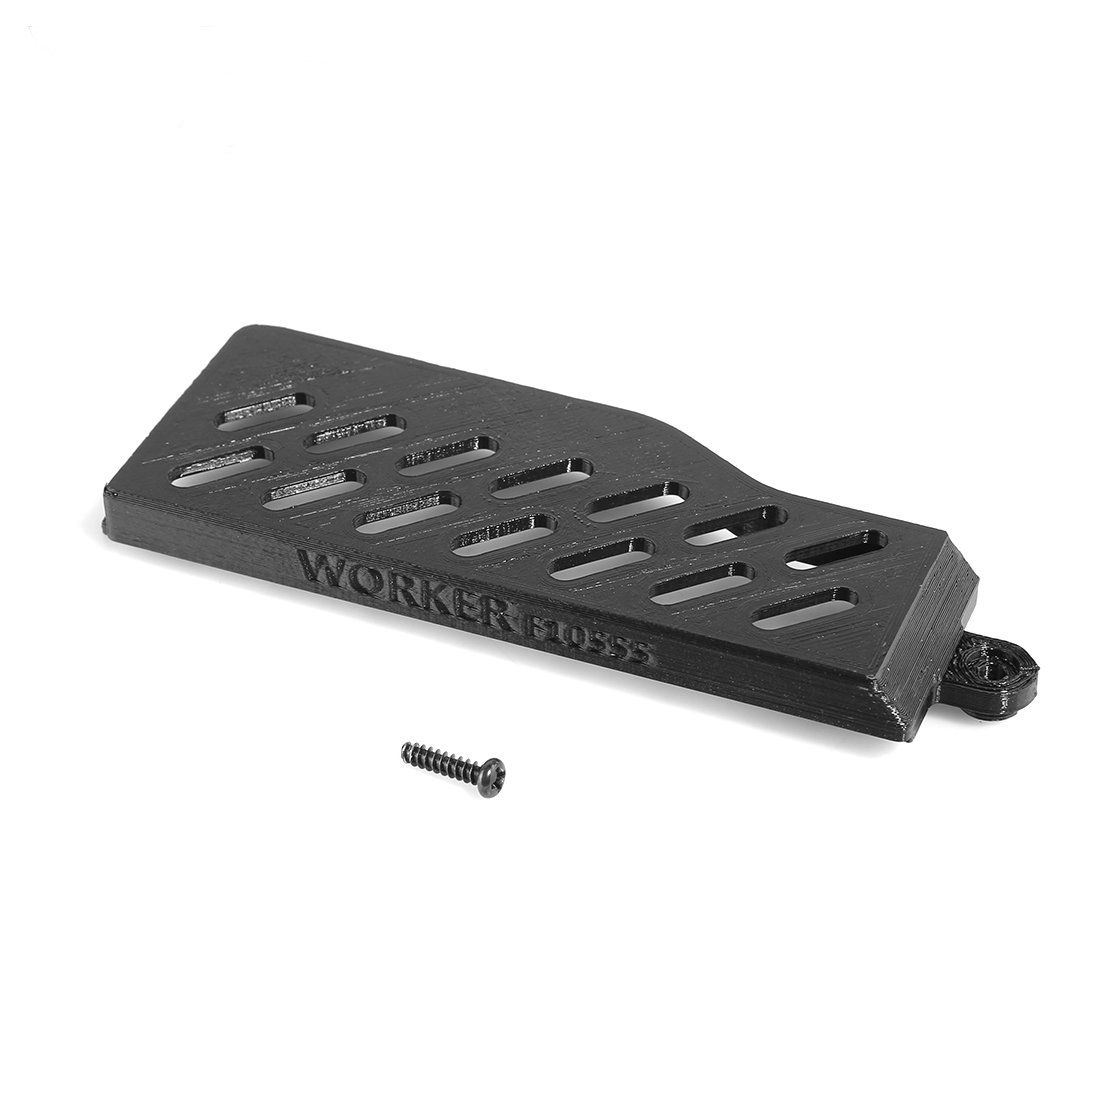 WORKER F10555 3D Printed Extended Battery Cover Part For Nerf Stryfe